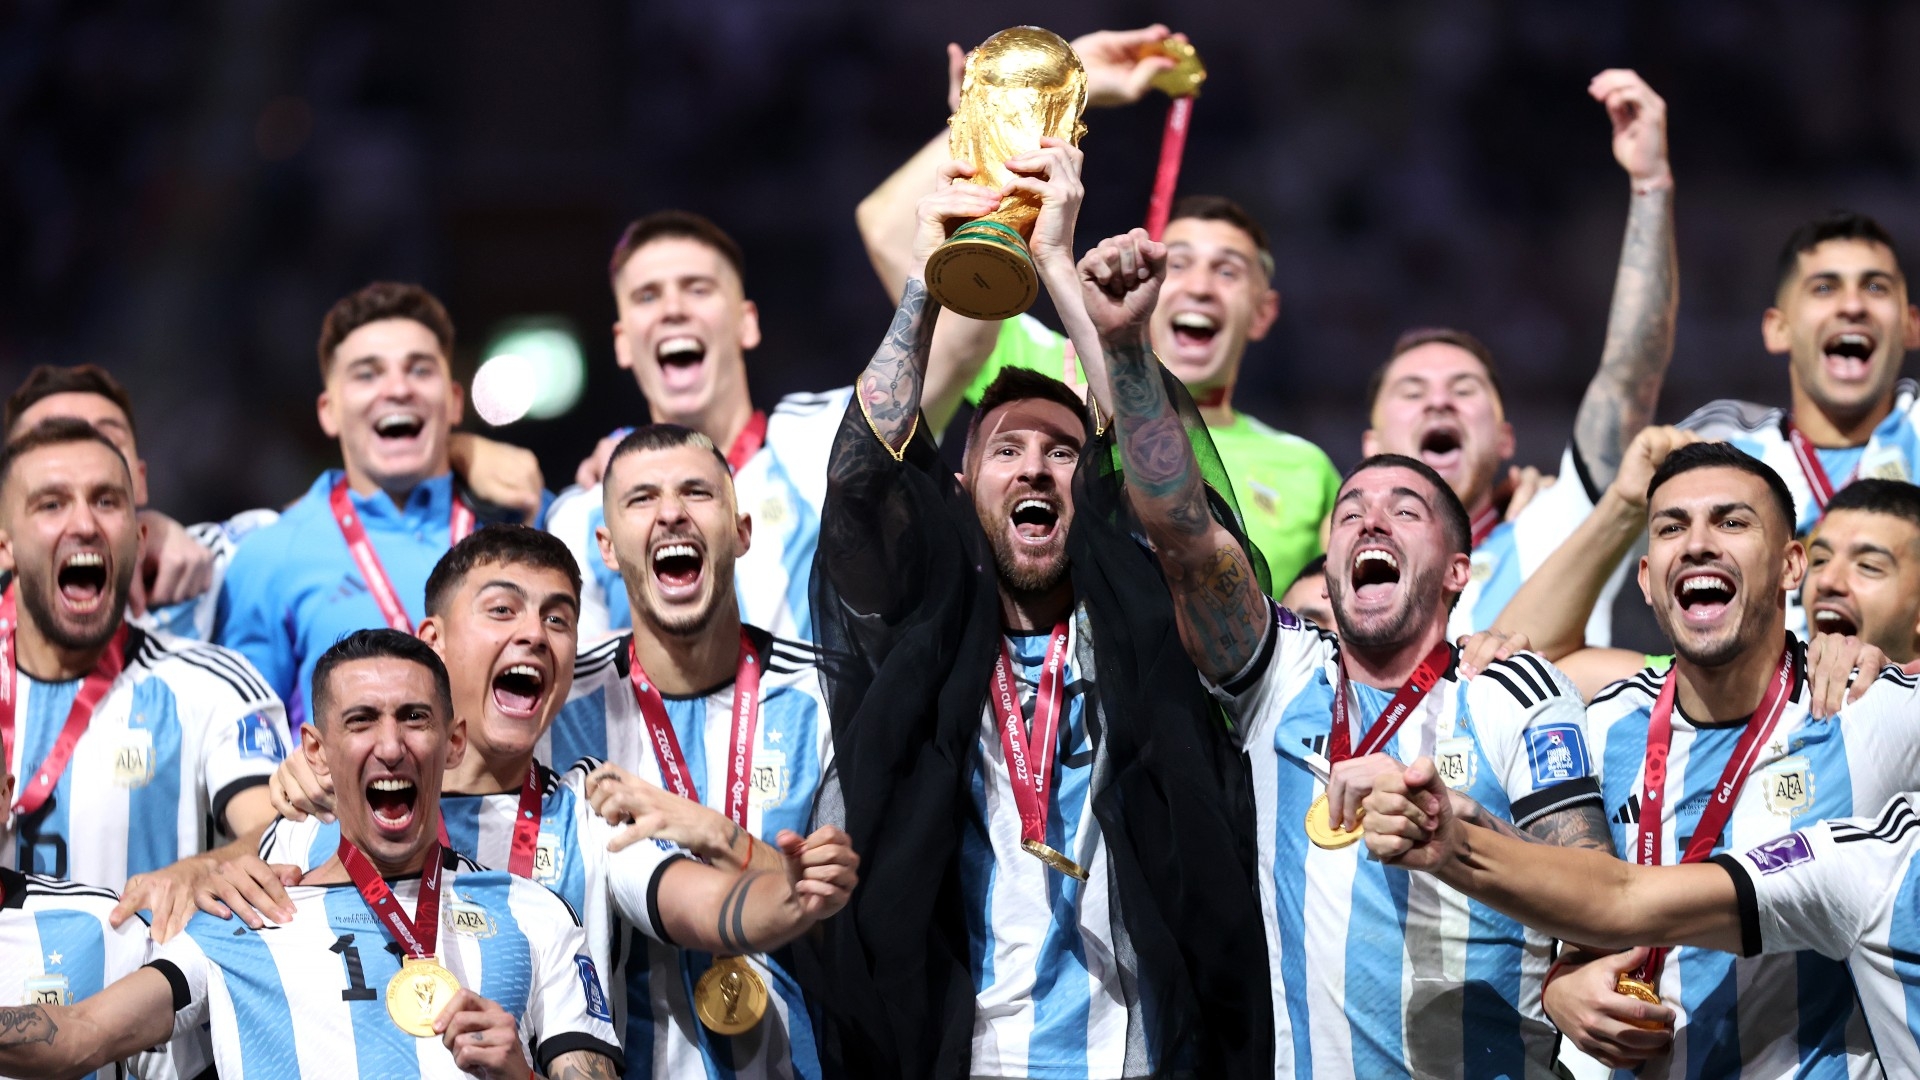 WATCH: Messi lifts World Cup trophy for Argentina as thrilling penalty shootout victory over France delivers ultimate prize to GOAT. Goal.com India